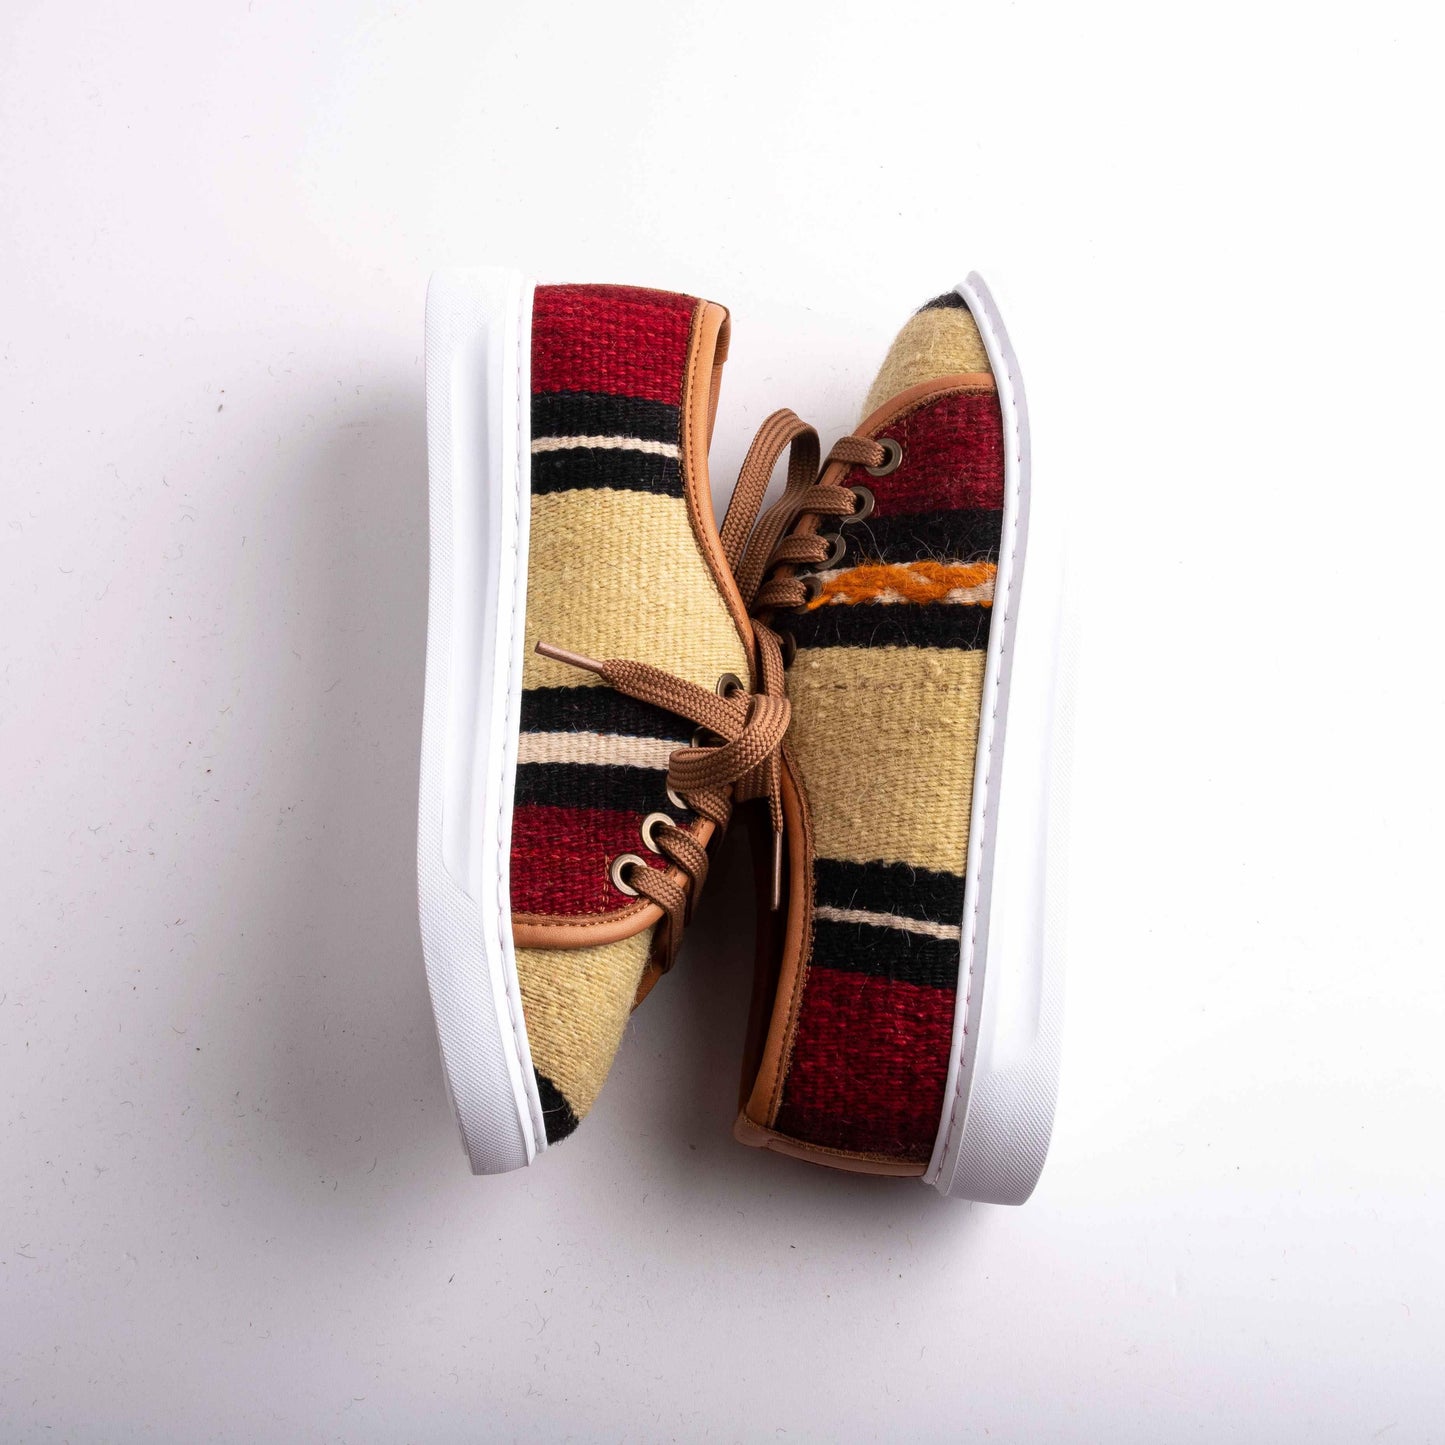 Ethnic Woman Slip-On Shoes Crafted From Handmade Kilim and Real Leather Size 6.5 - Base Width: 8.5 cm - Base Length: 25,5 cm